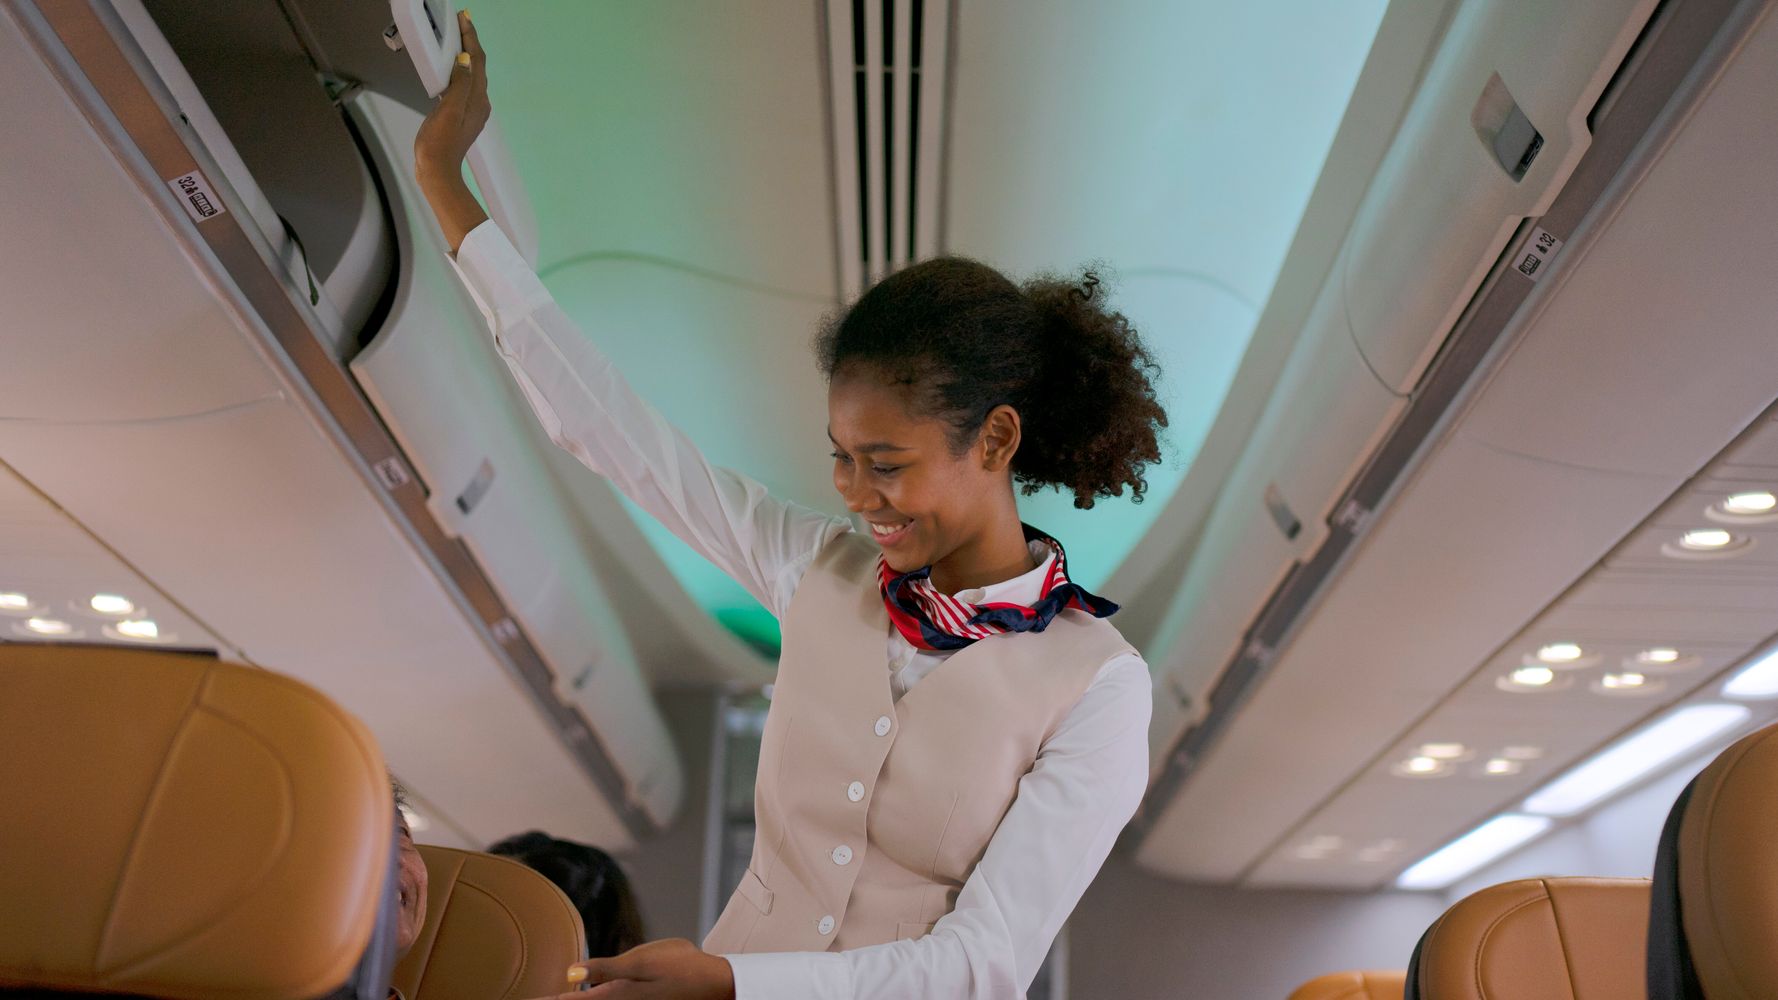 Why Do Flight Attendants Sit On Their Hands?